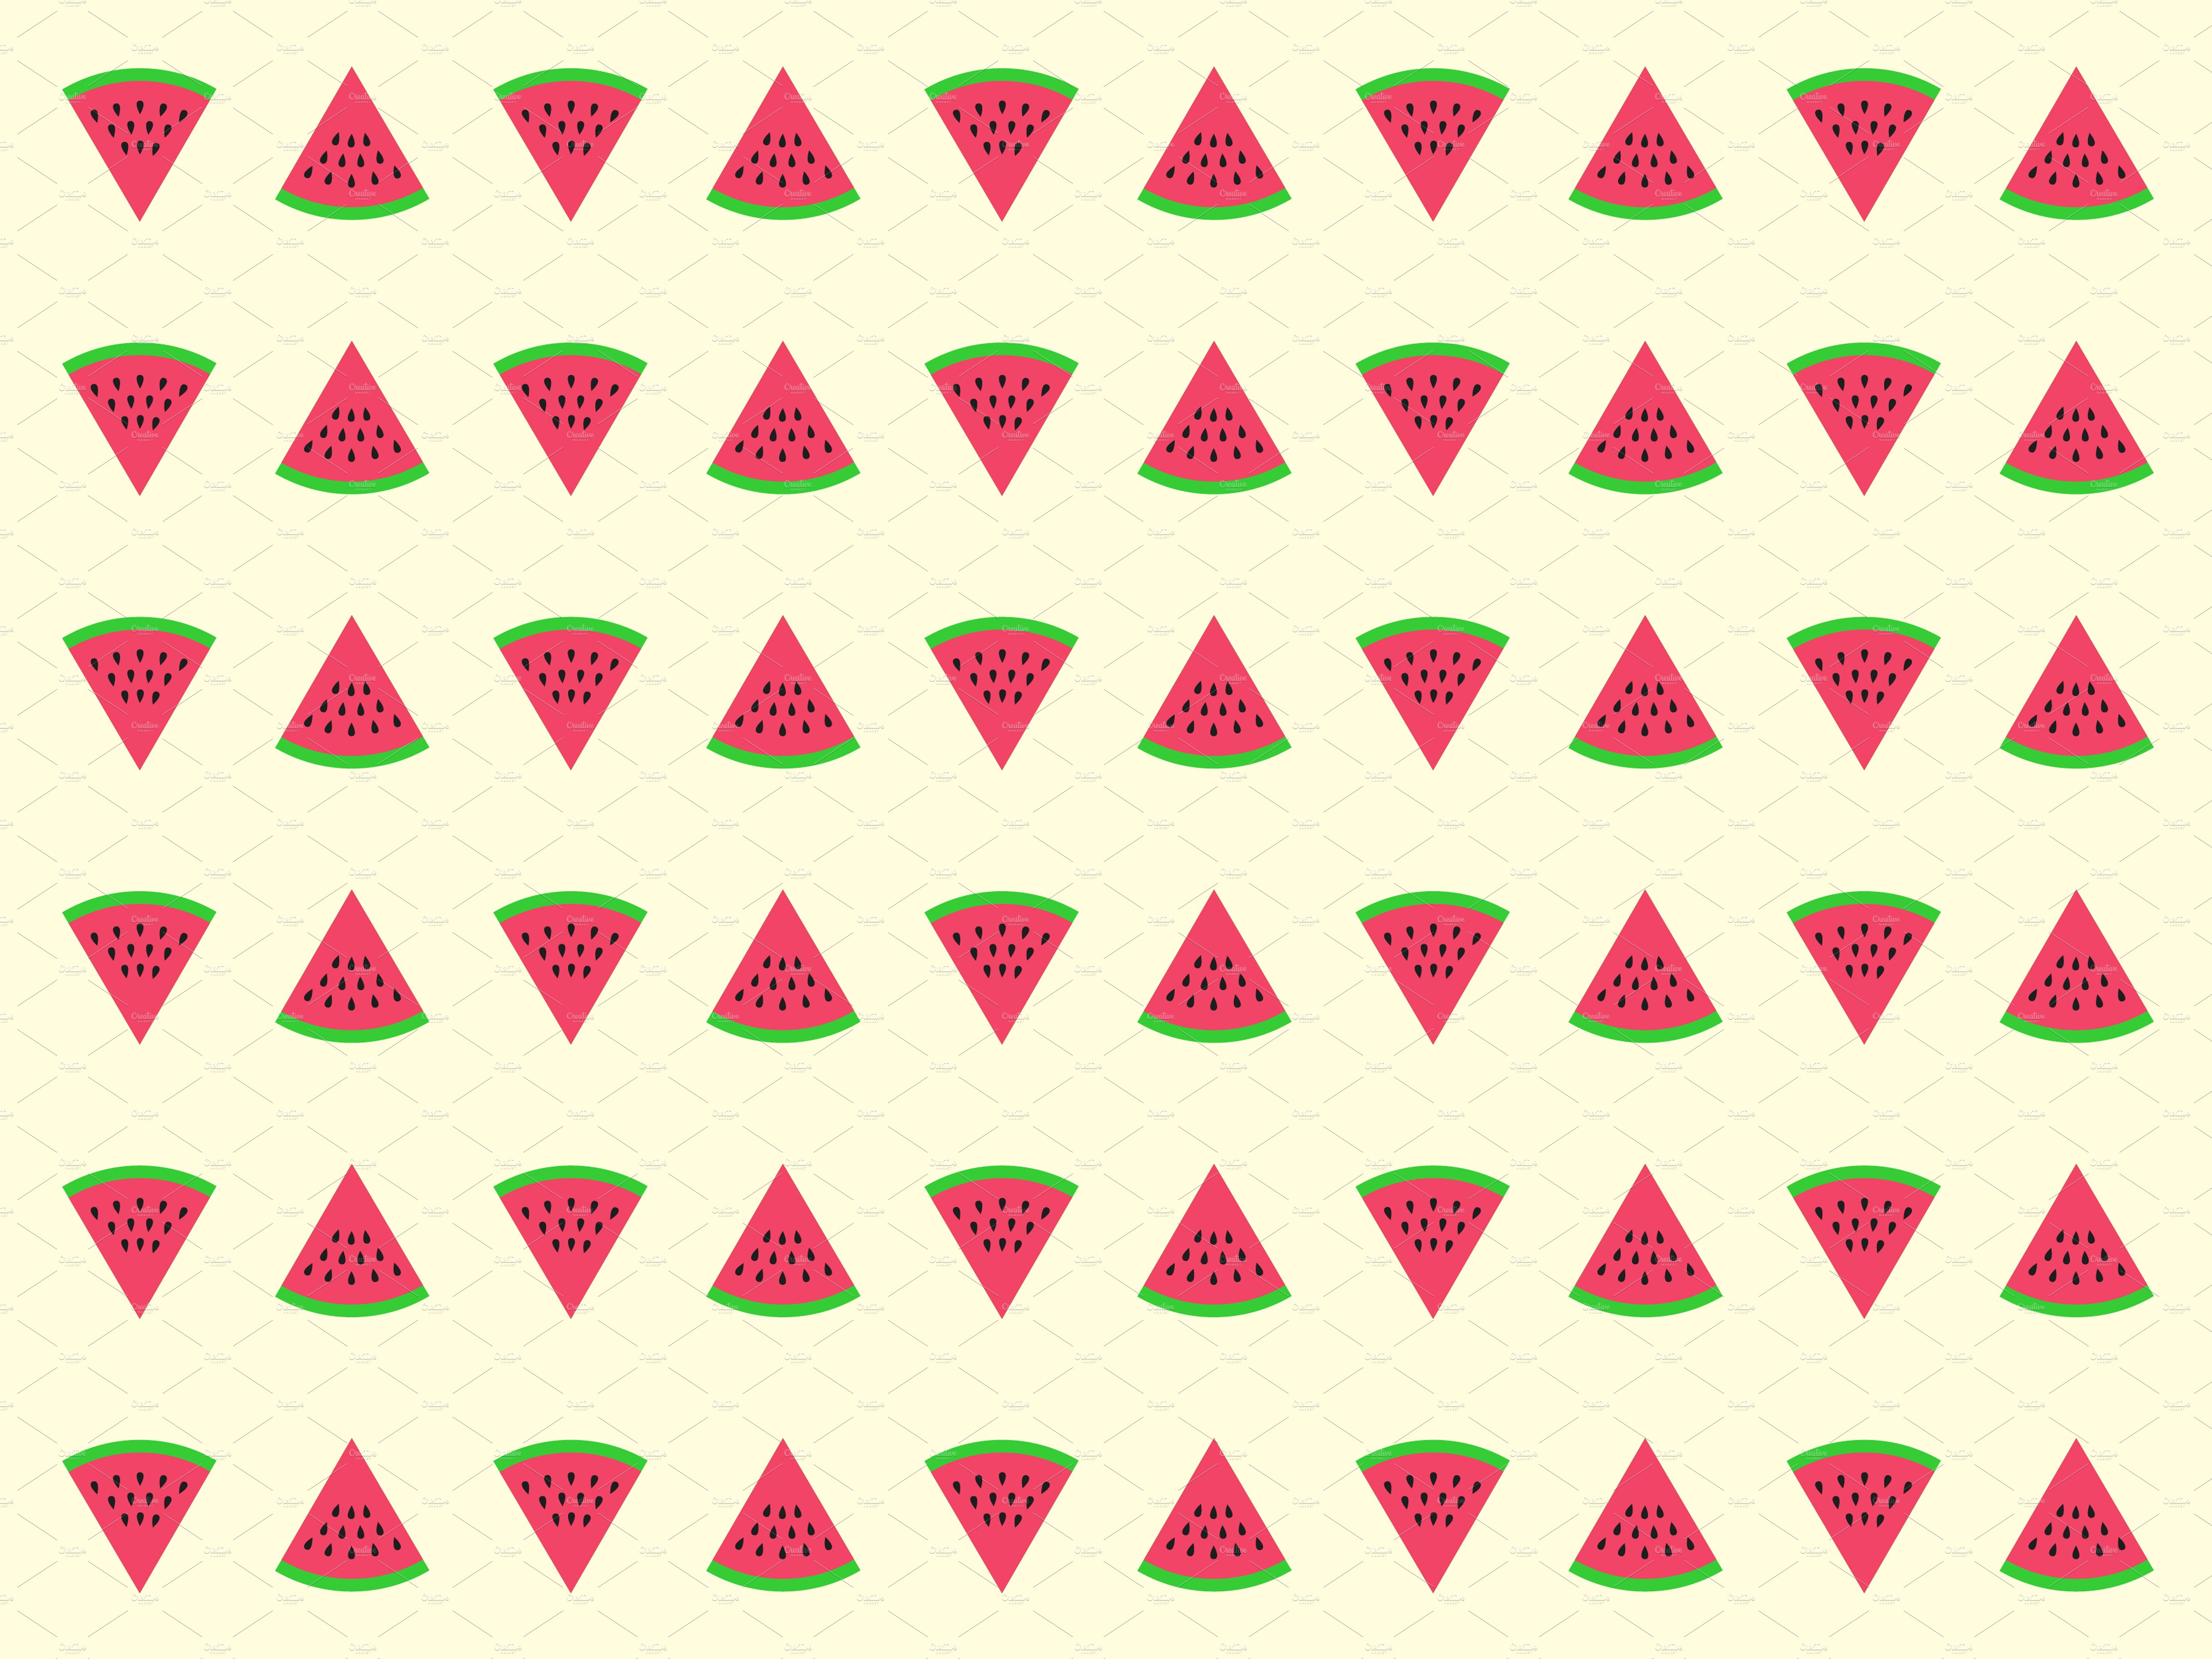 Watermelon slices pattern cover image.